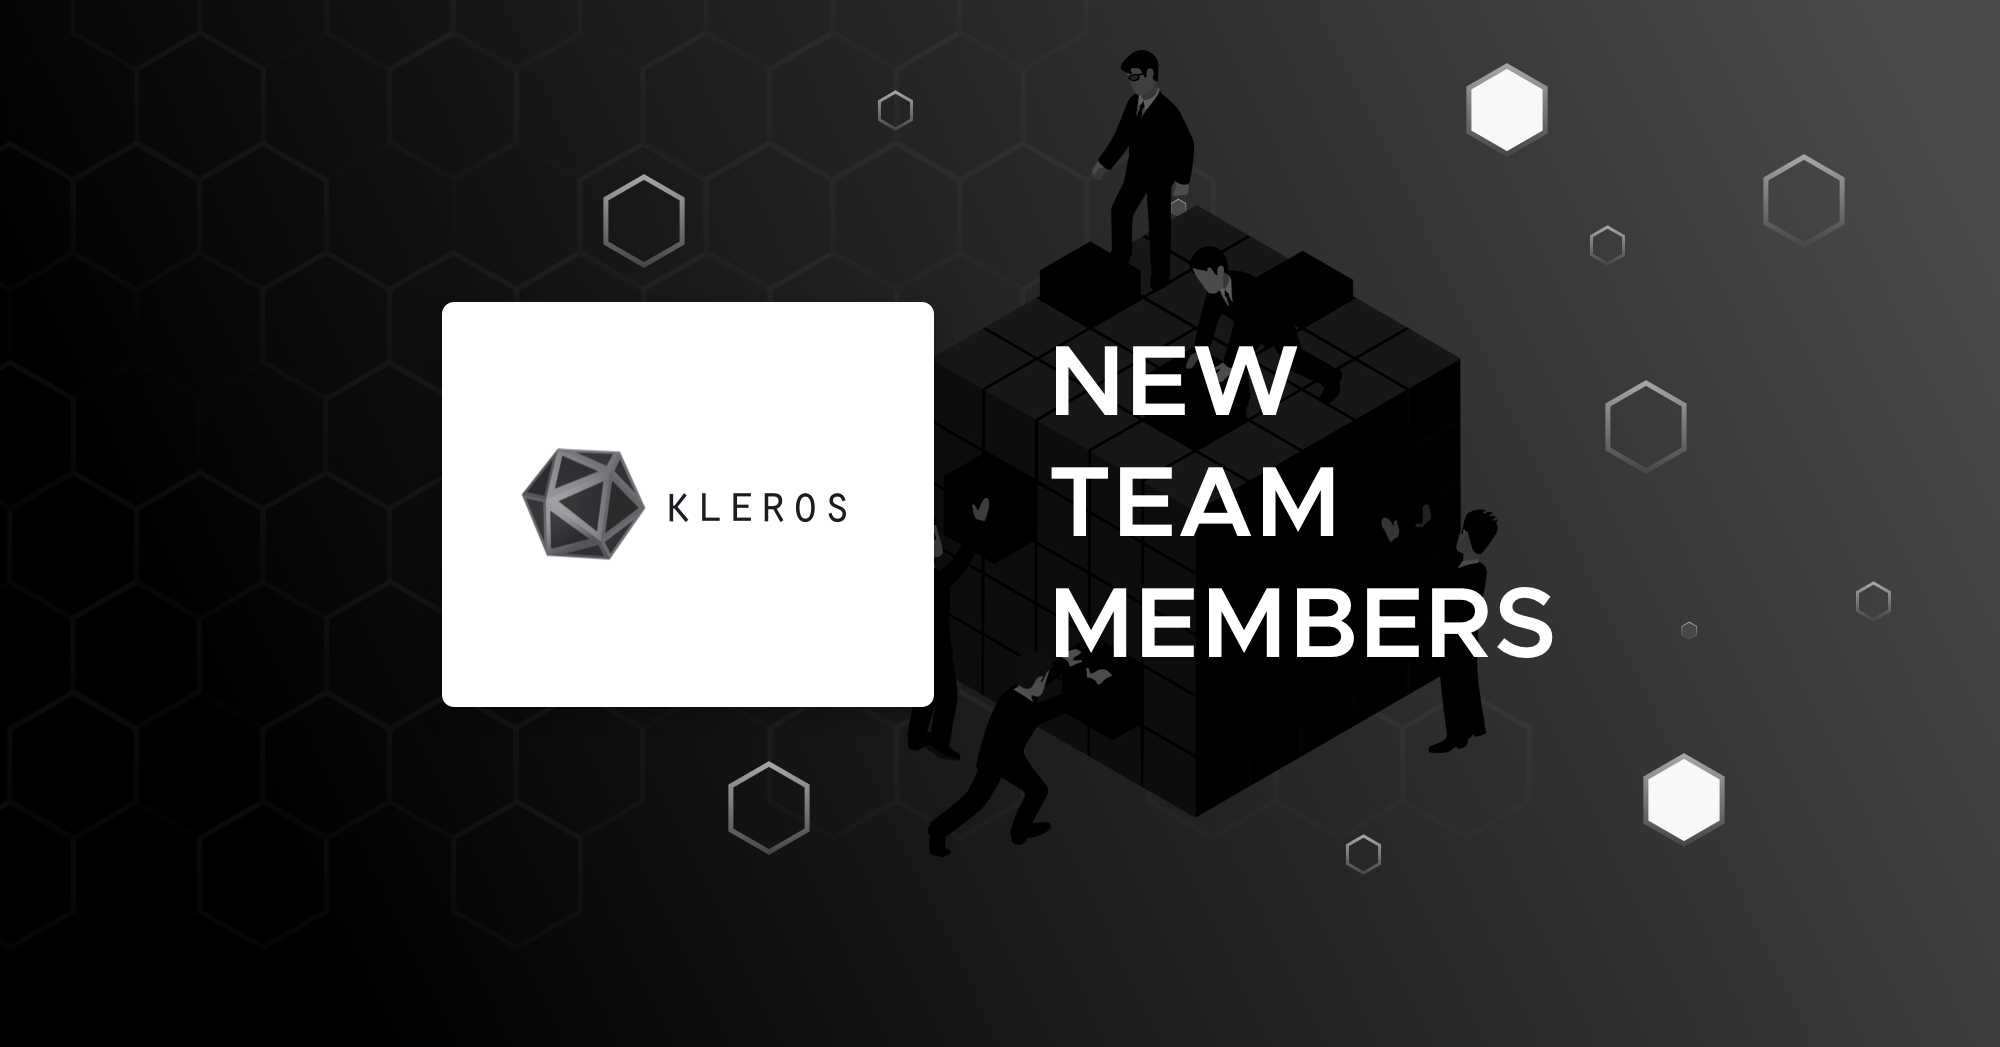 Blockchain Justice Expands - Kleros Adds New Team Members